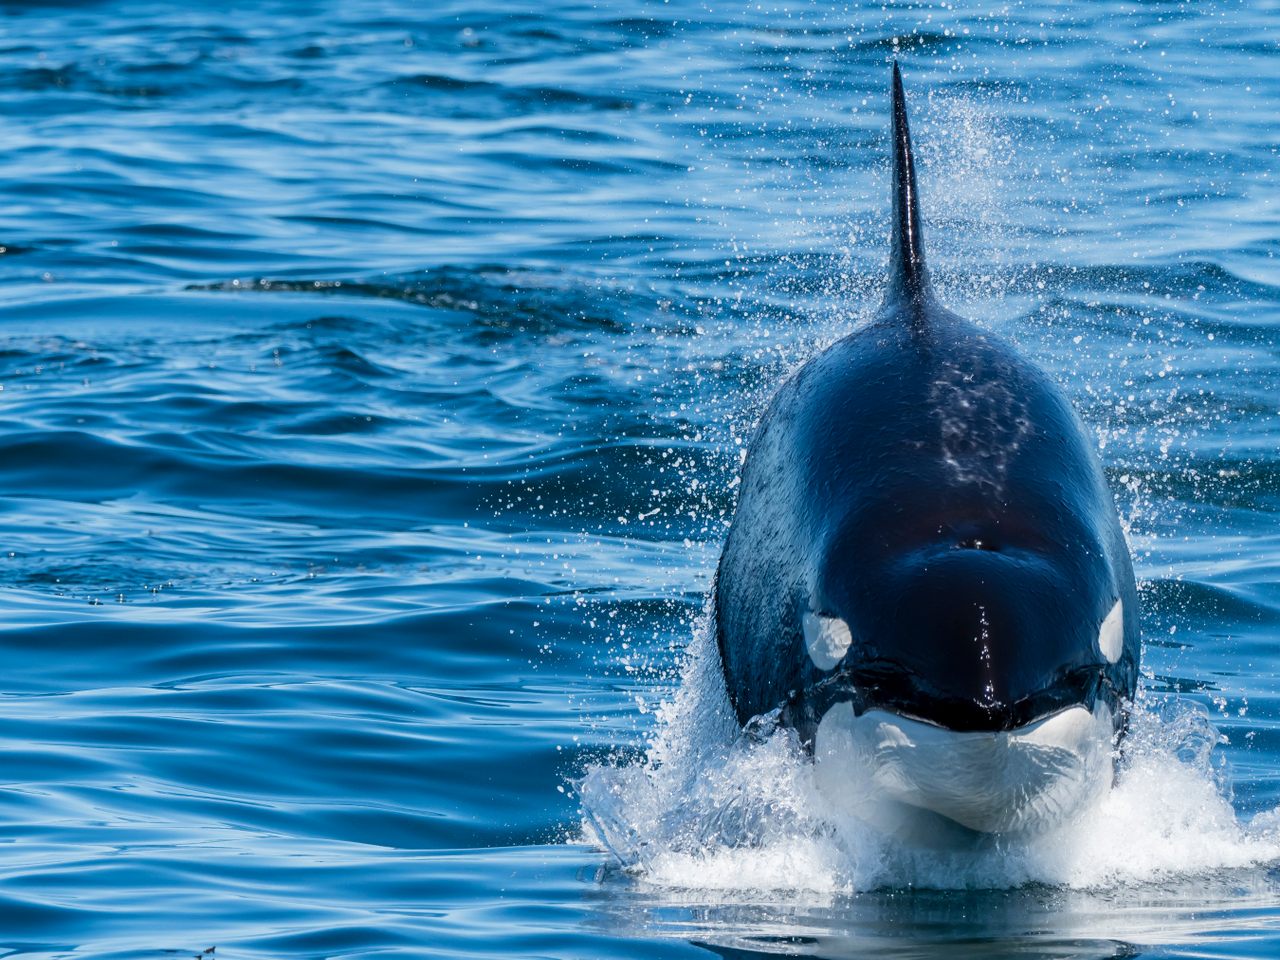 A transient killer whale power lunging—a hunting technique—off the California coast. A small subset of transient orcas specialize in taking down large marine mammals.